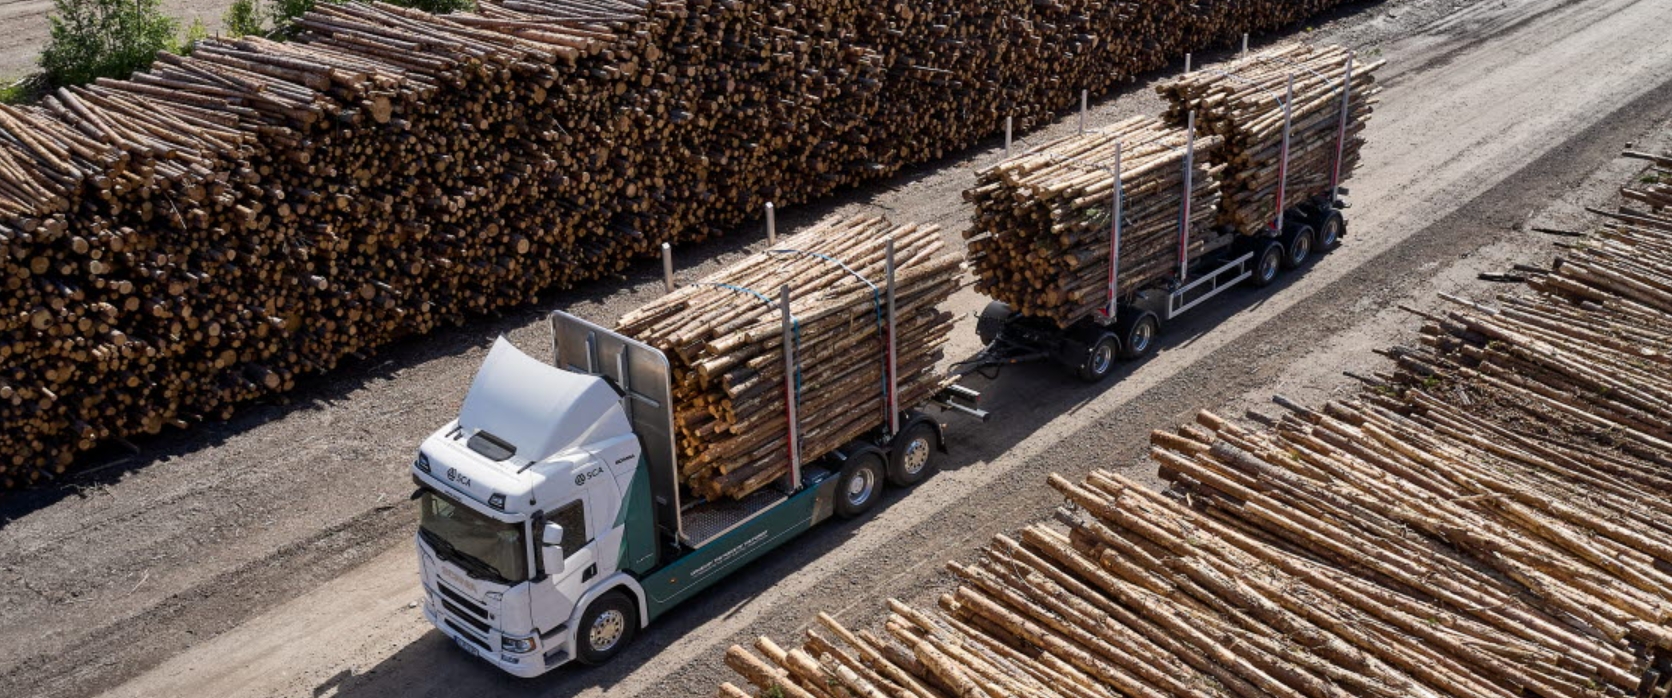 The first electric logging truck has just been delivered to Sweden and can carry up to 80 tonnes of wood